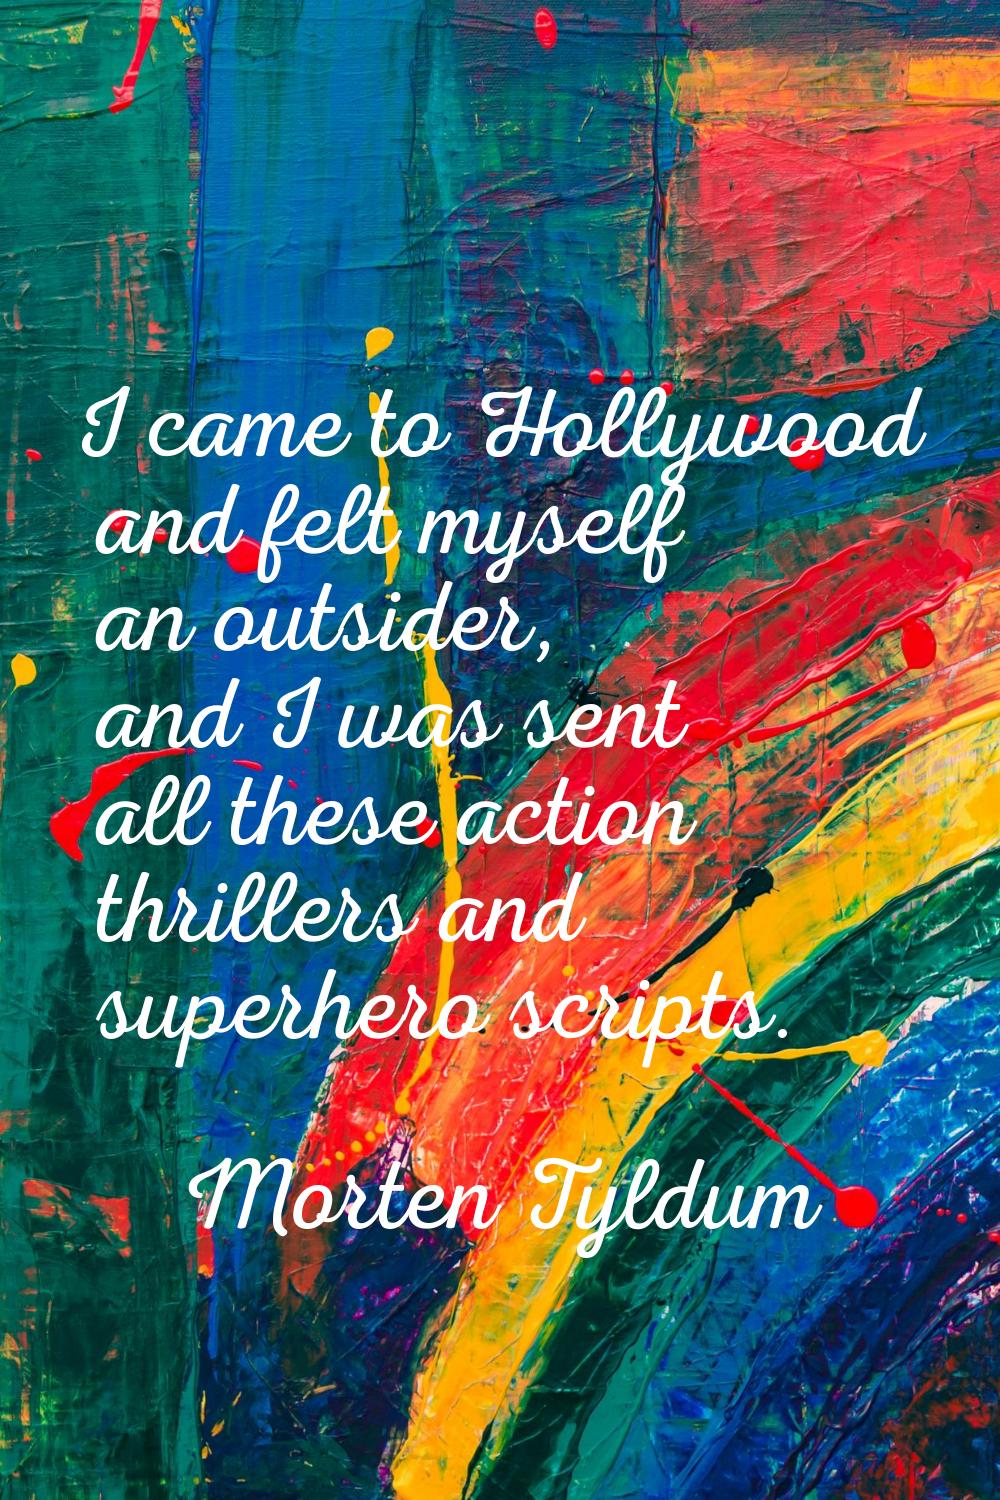 I came to Hollywood and felt myself an outsider, and I was sent all these action thrillers and supe